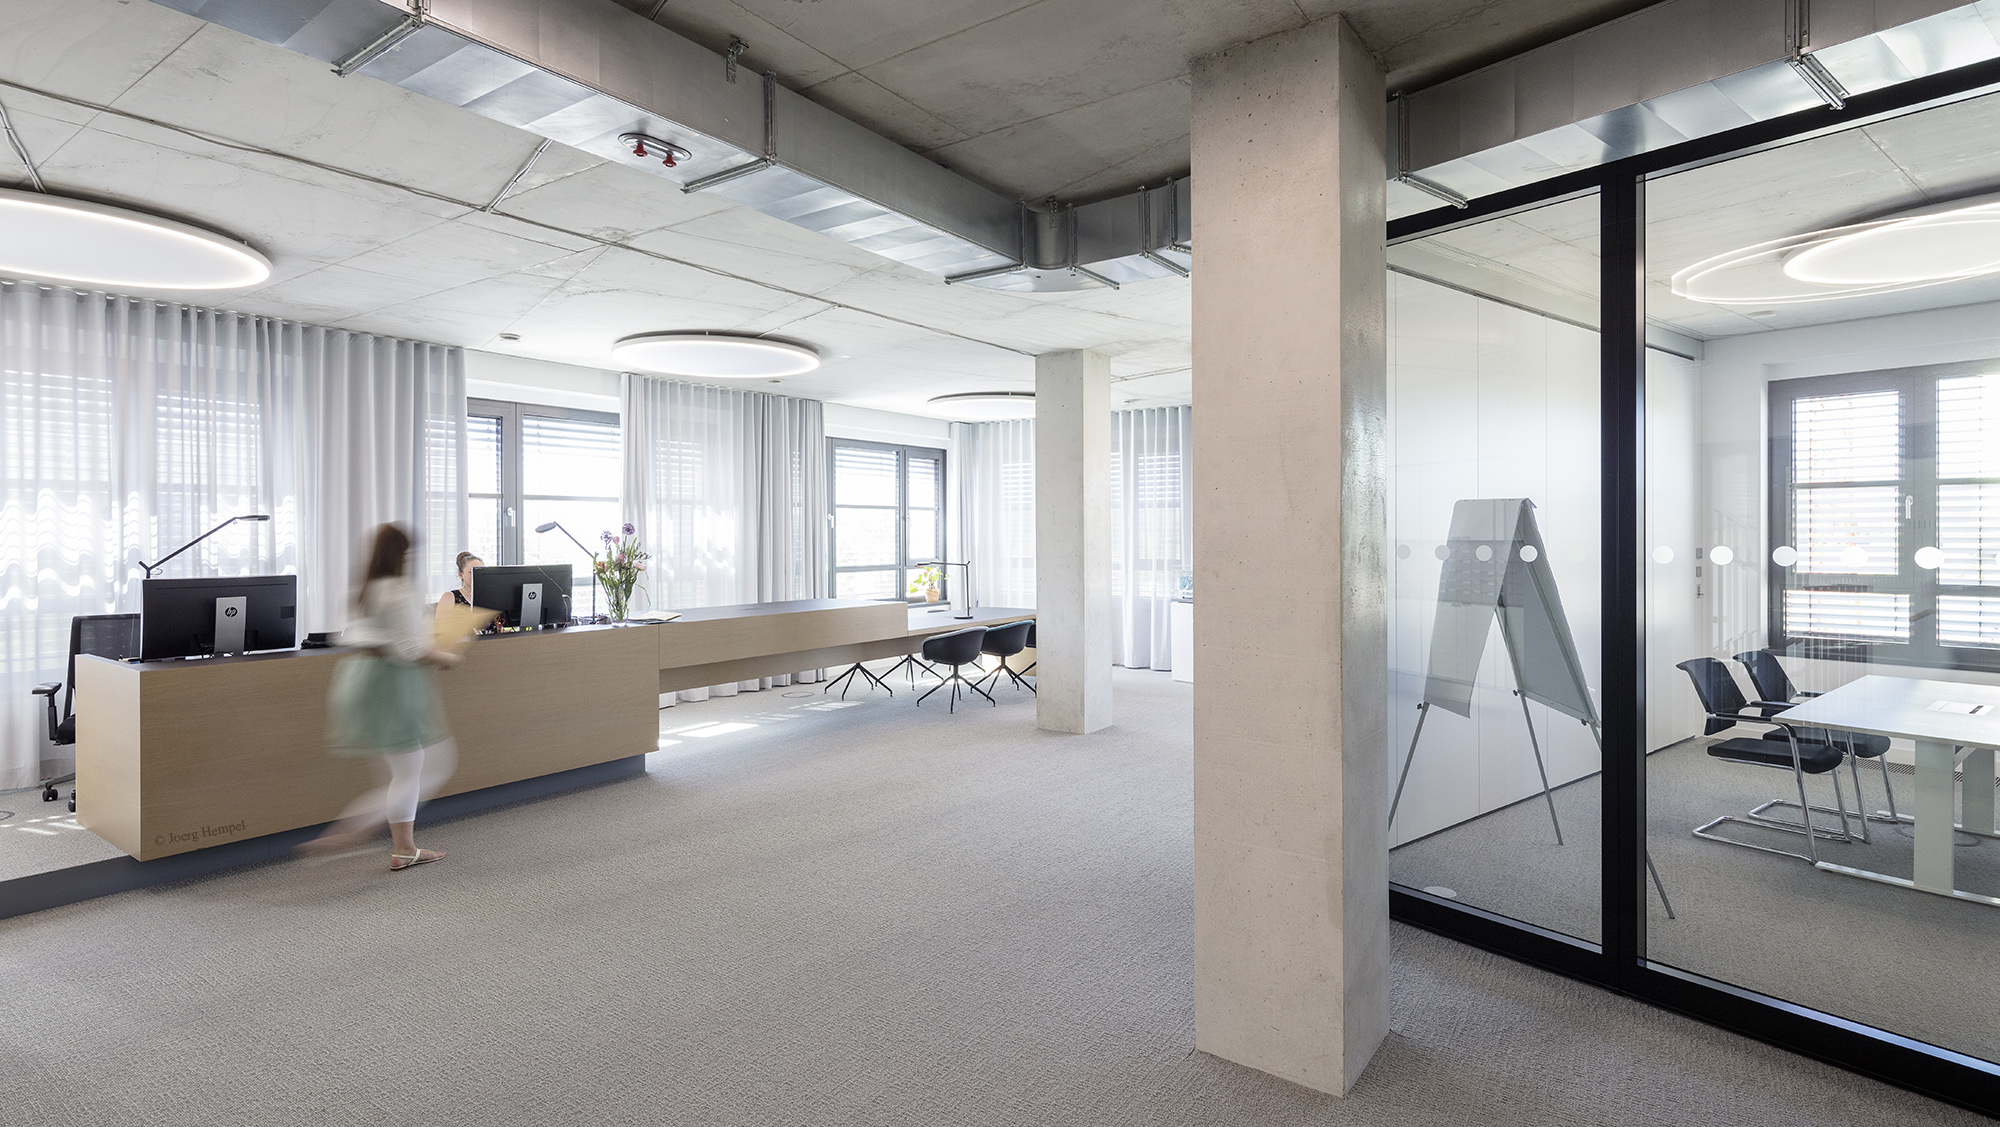 The reception area of the Frankfurt office is open and inviting. The extended reception counter also offers additional flexible workplaces.